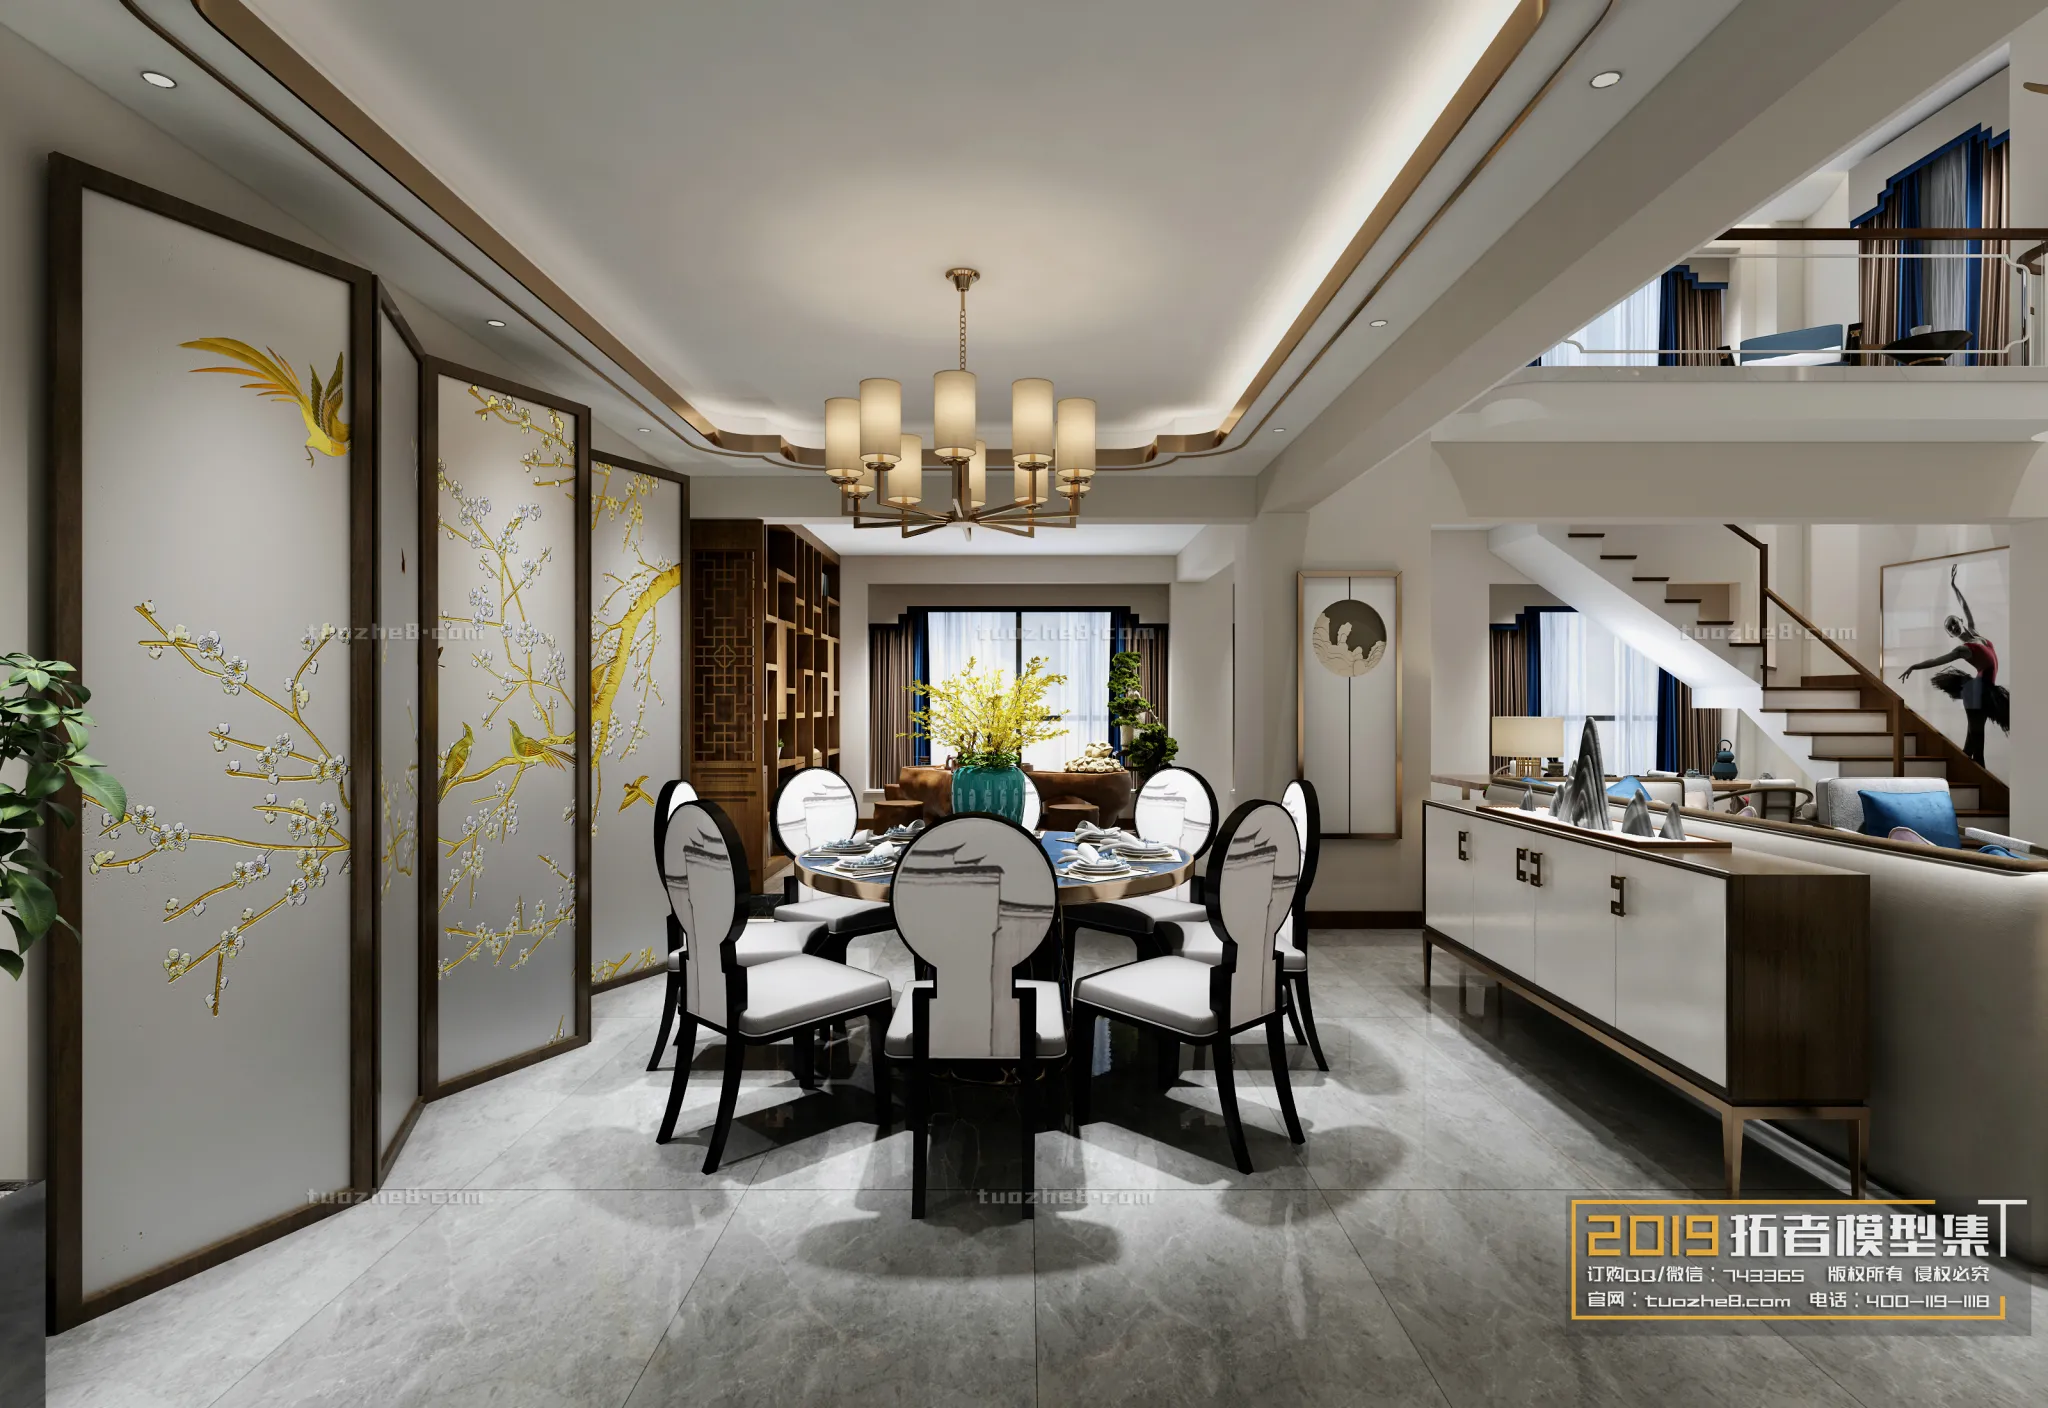 Extension Interior – LINGVING ROOM – CHINESE STYLES – 091